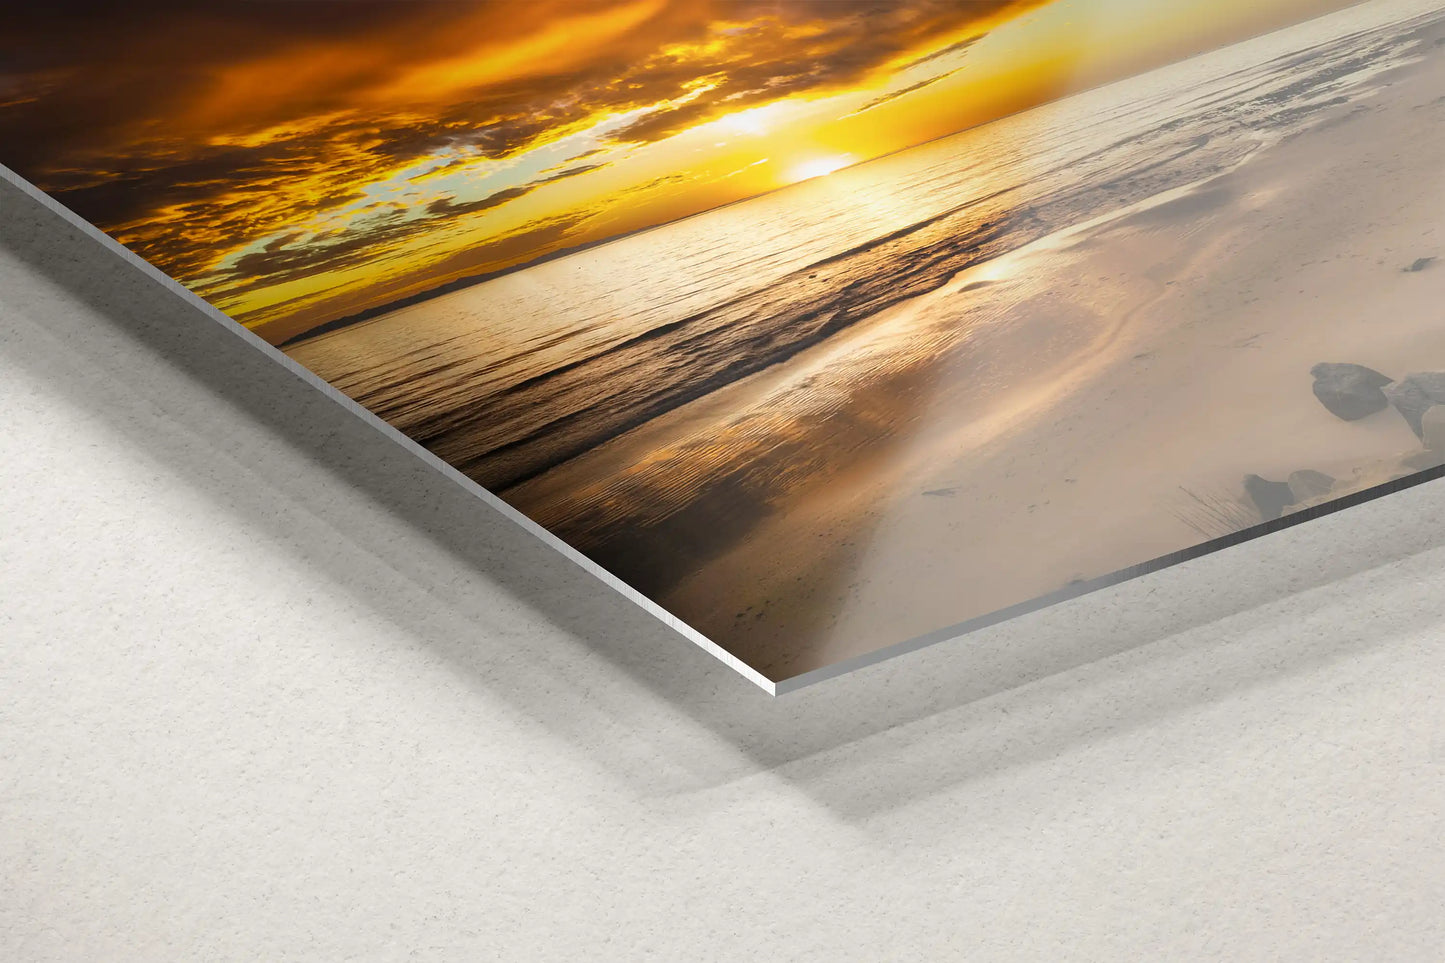 Detail of a metal print edge, featuring the Hobson Beach sunset, emphasizing the durable, sleek medium enhancing the image's vibrancy.